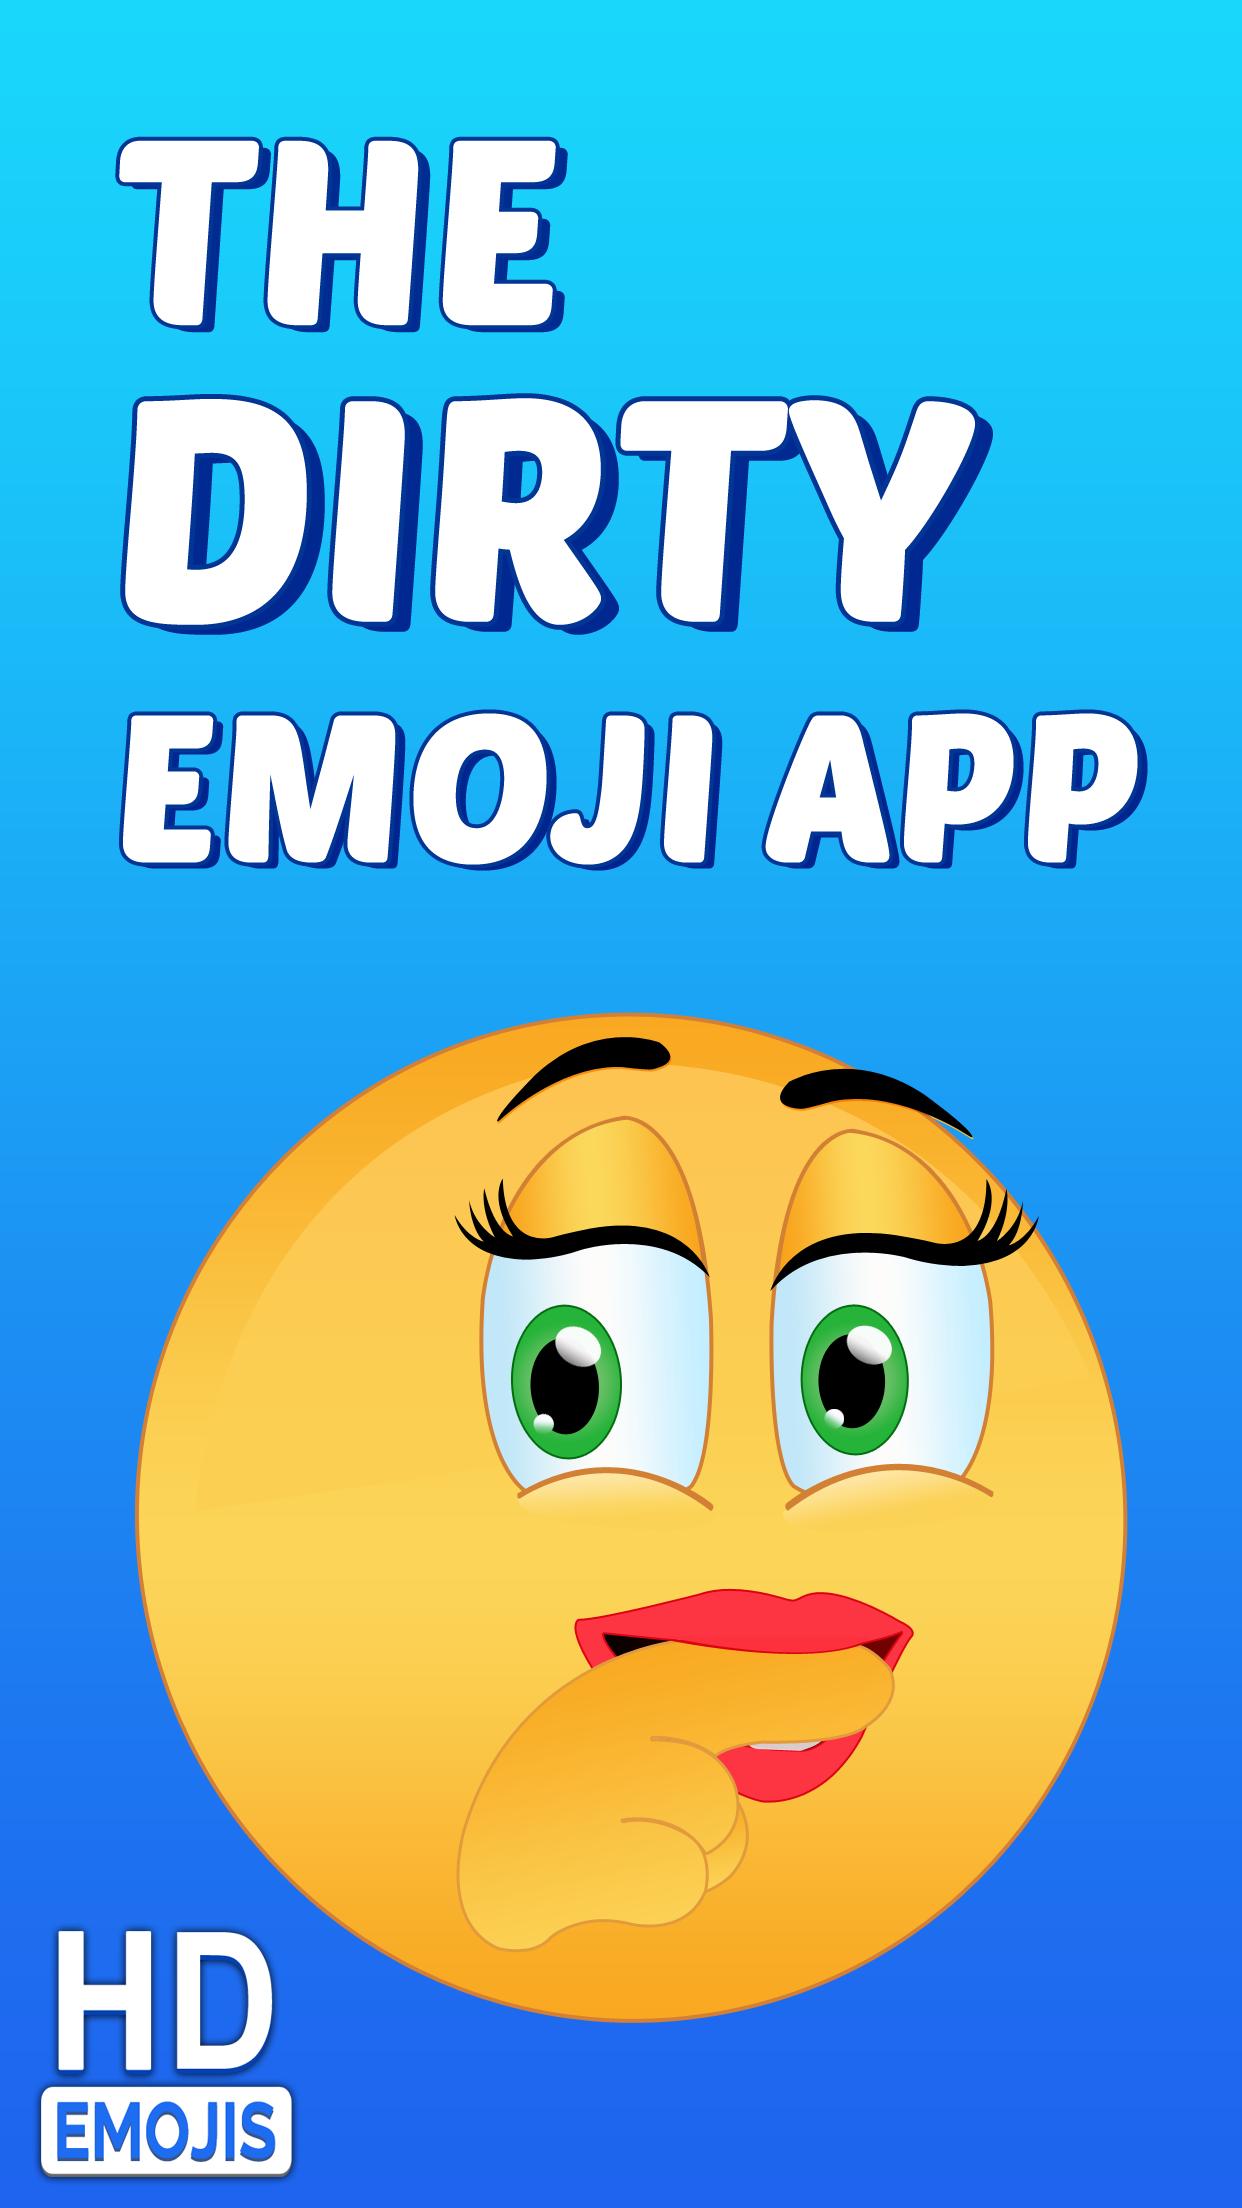 Dirty Emoji Keyboard App for Android - APK Download